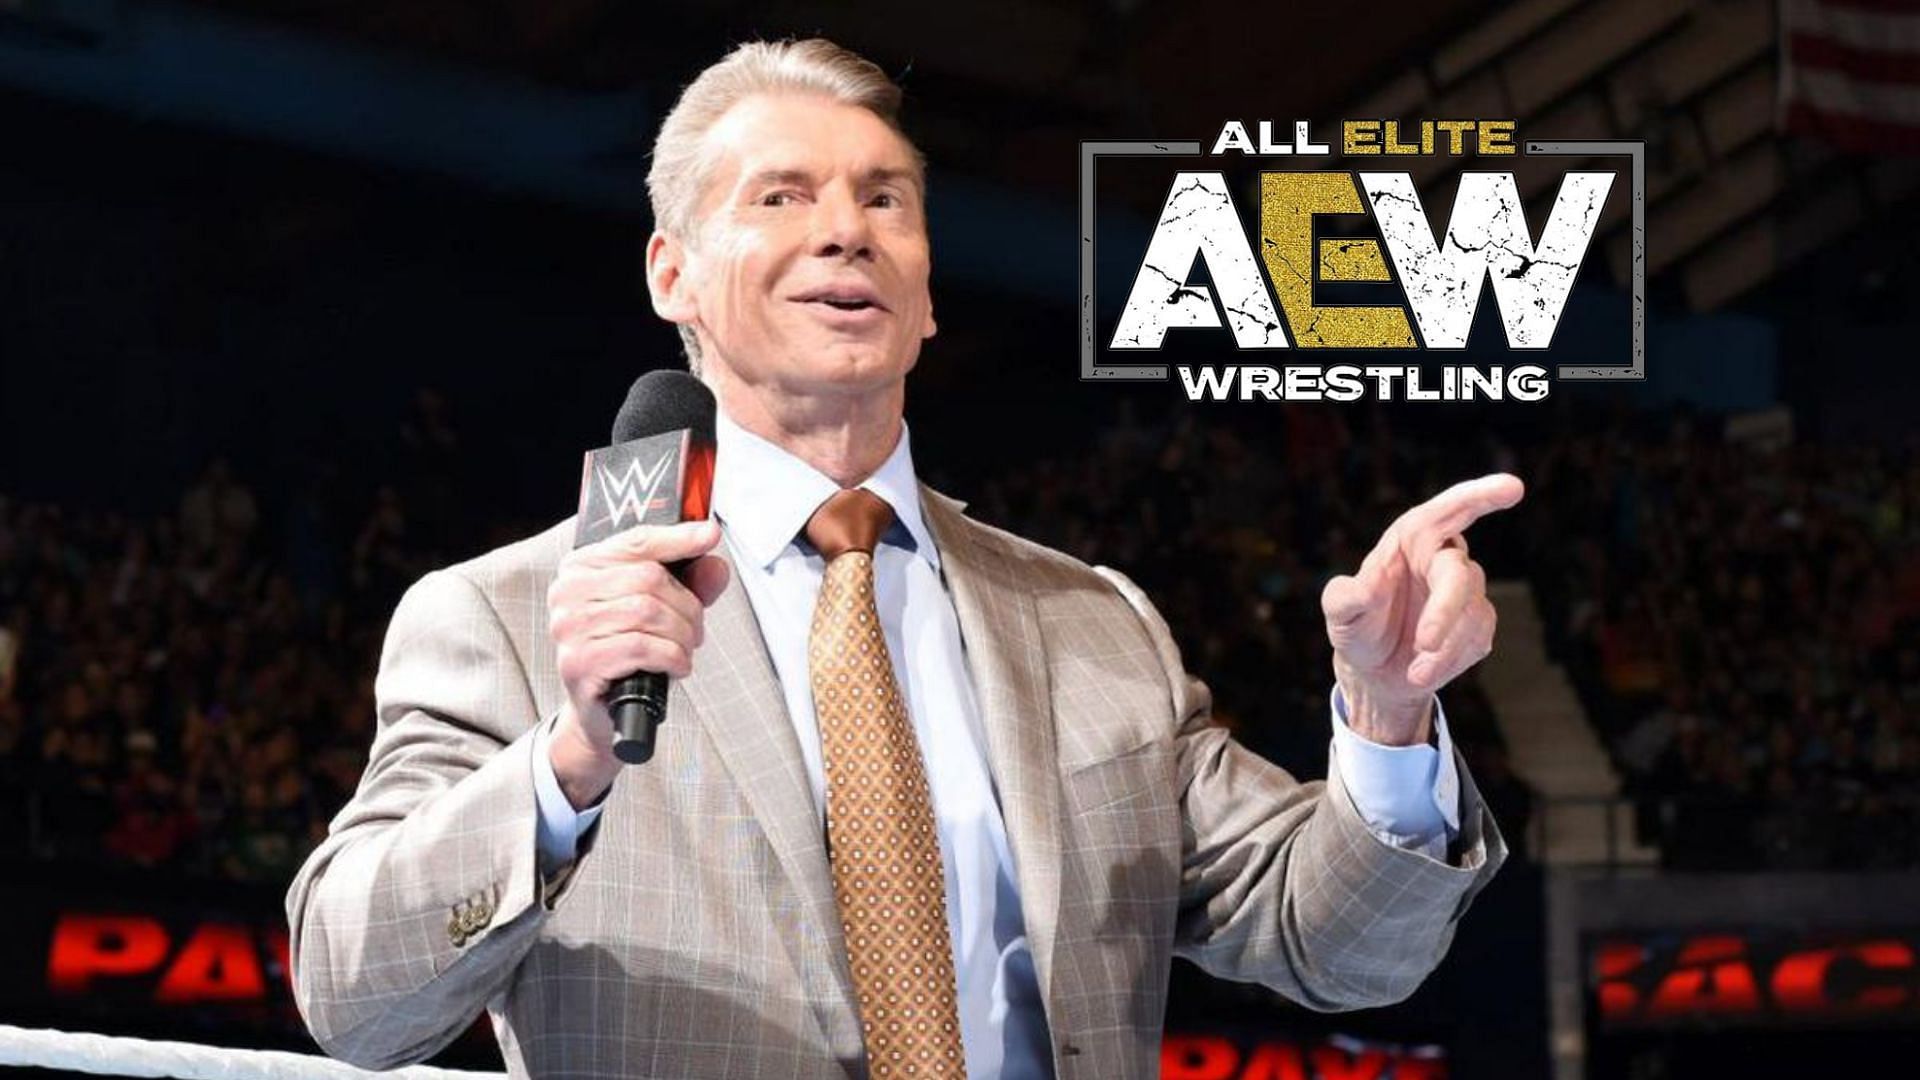 Before moving to AEW, this WWE legend was one of the last hires of former chairman Vince McMahon.